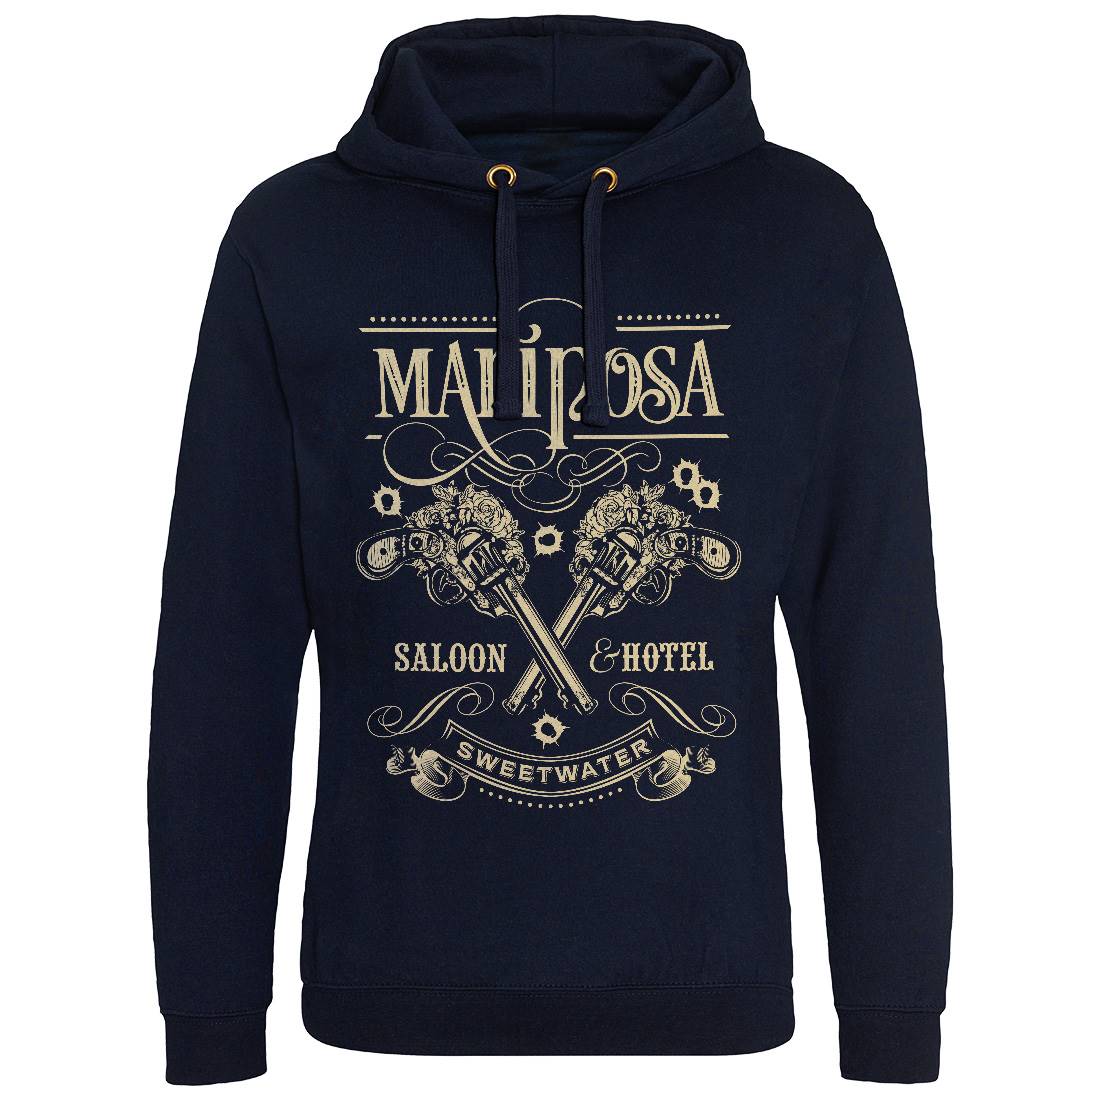 Mariposa Saloon Mens Hoodie Without Pocket Drinks D164